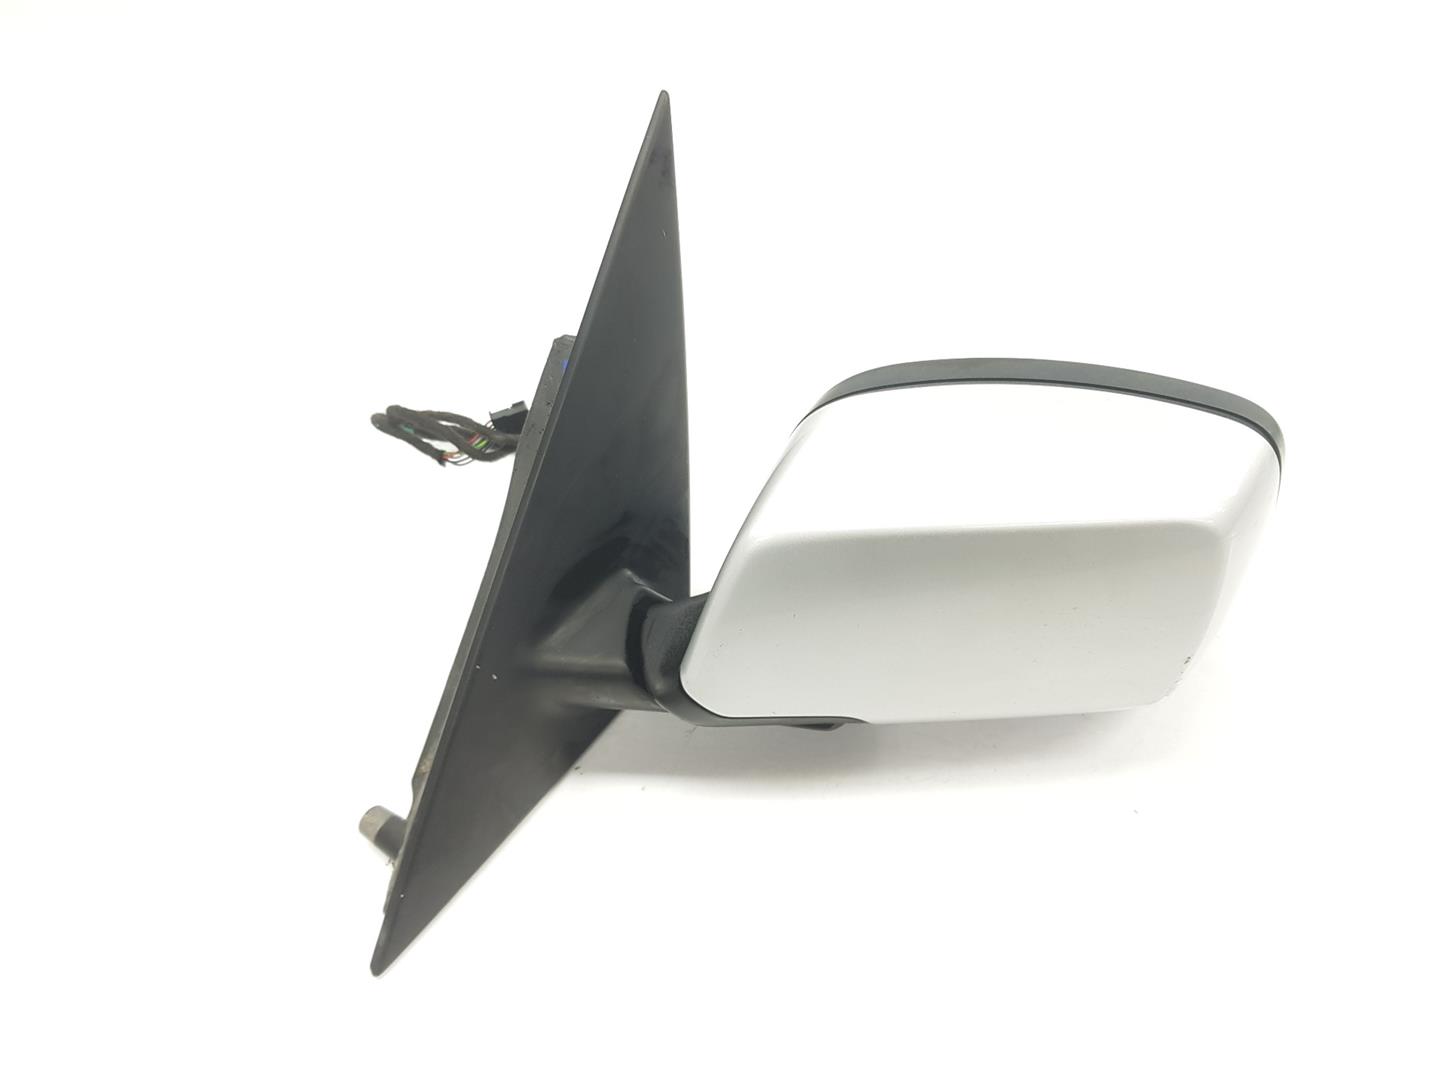 BMW X3 E83 (2003-2010) Left Side Wing Mirror 51163448131, 51163448131 22840615